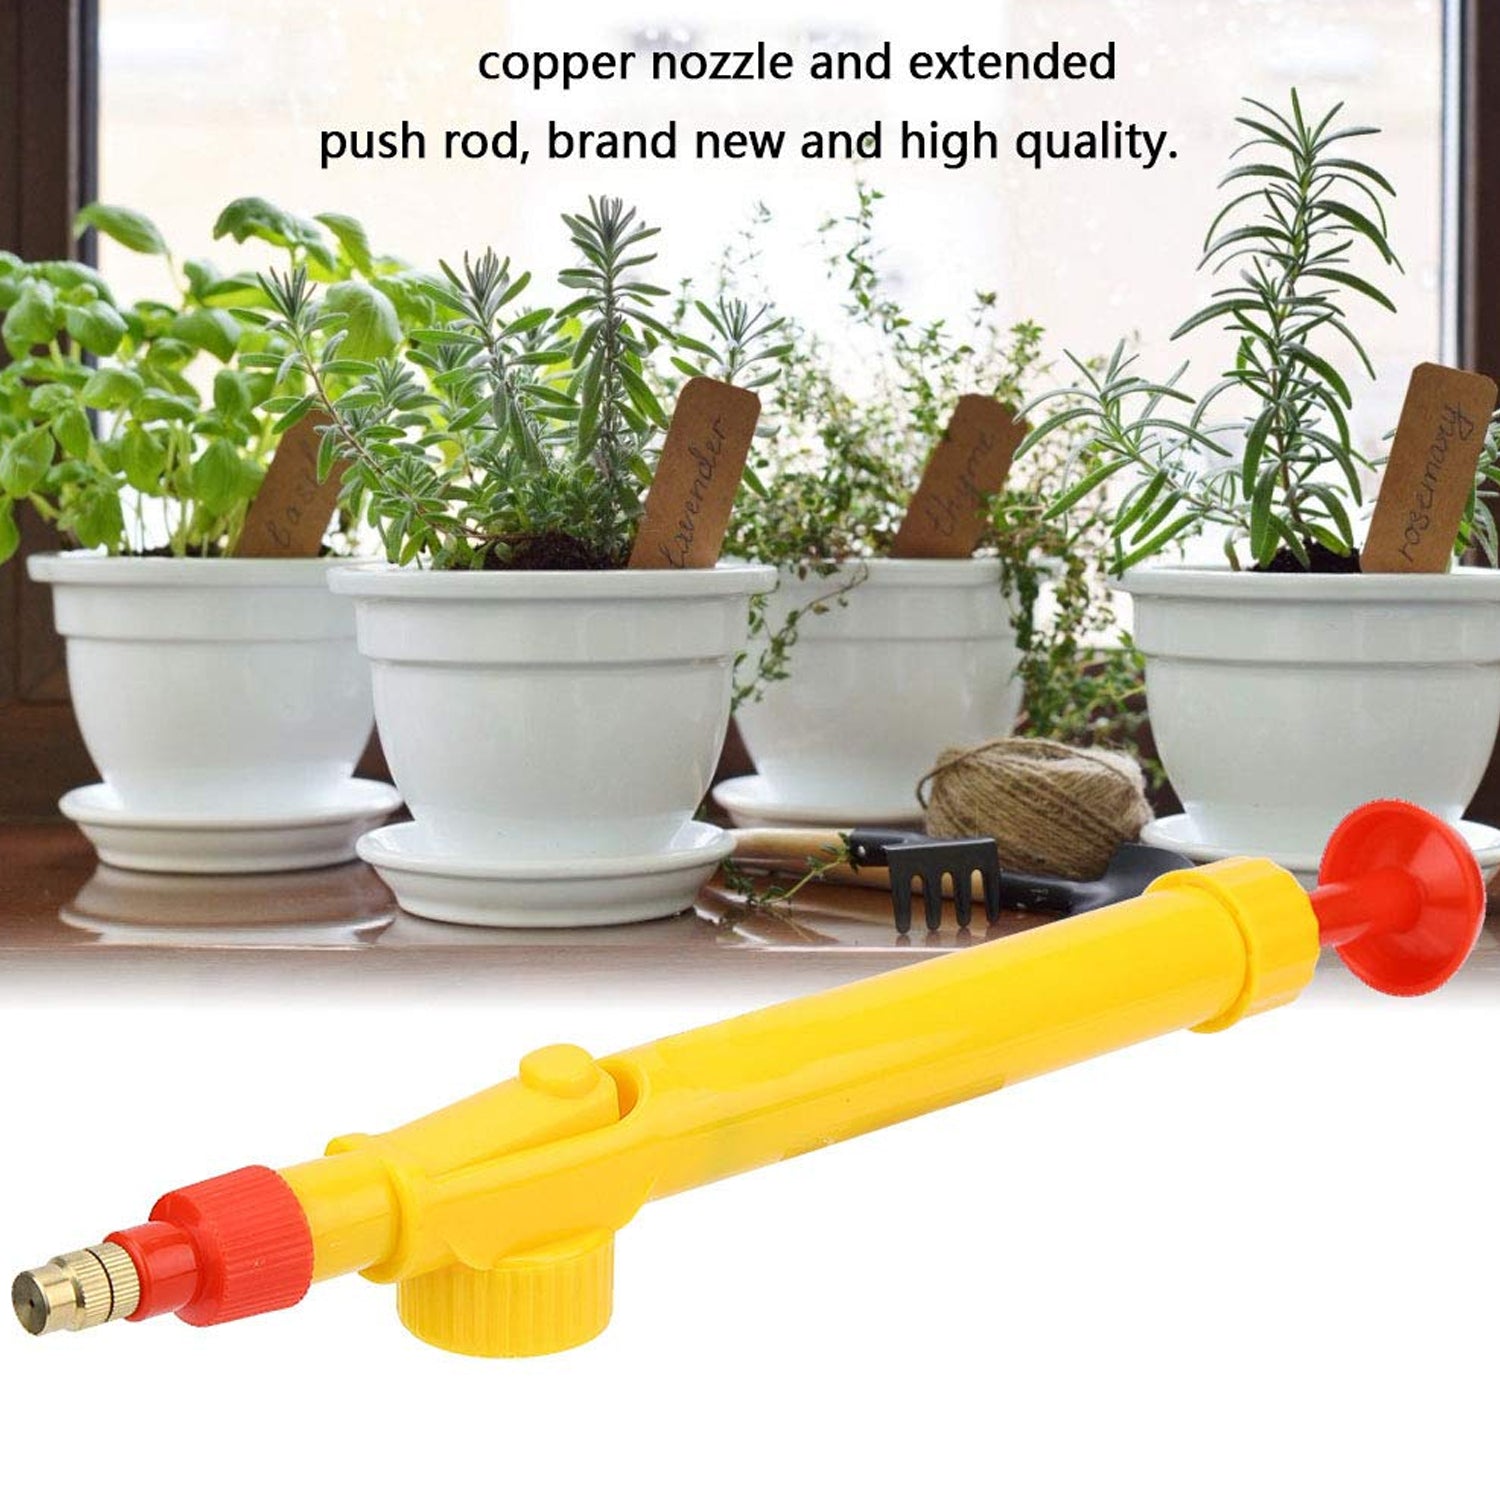 0470 Water Bottle Spray Gun Nozzle Manual Adjustable Water Pump Garden & Washing Hand Held Sprayer,Watering Can Sprayer Pressure Nozzle Irrigation Tool and Pump for Efficient Care - Boost Your Gardening Experience (1 Pc)